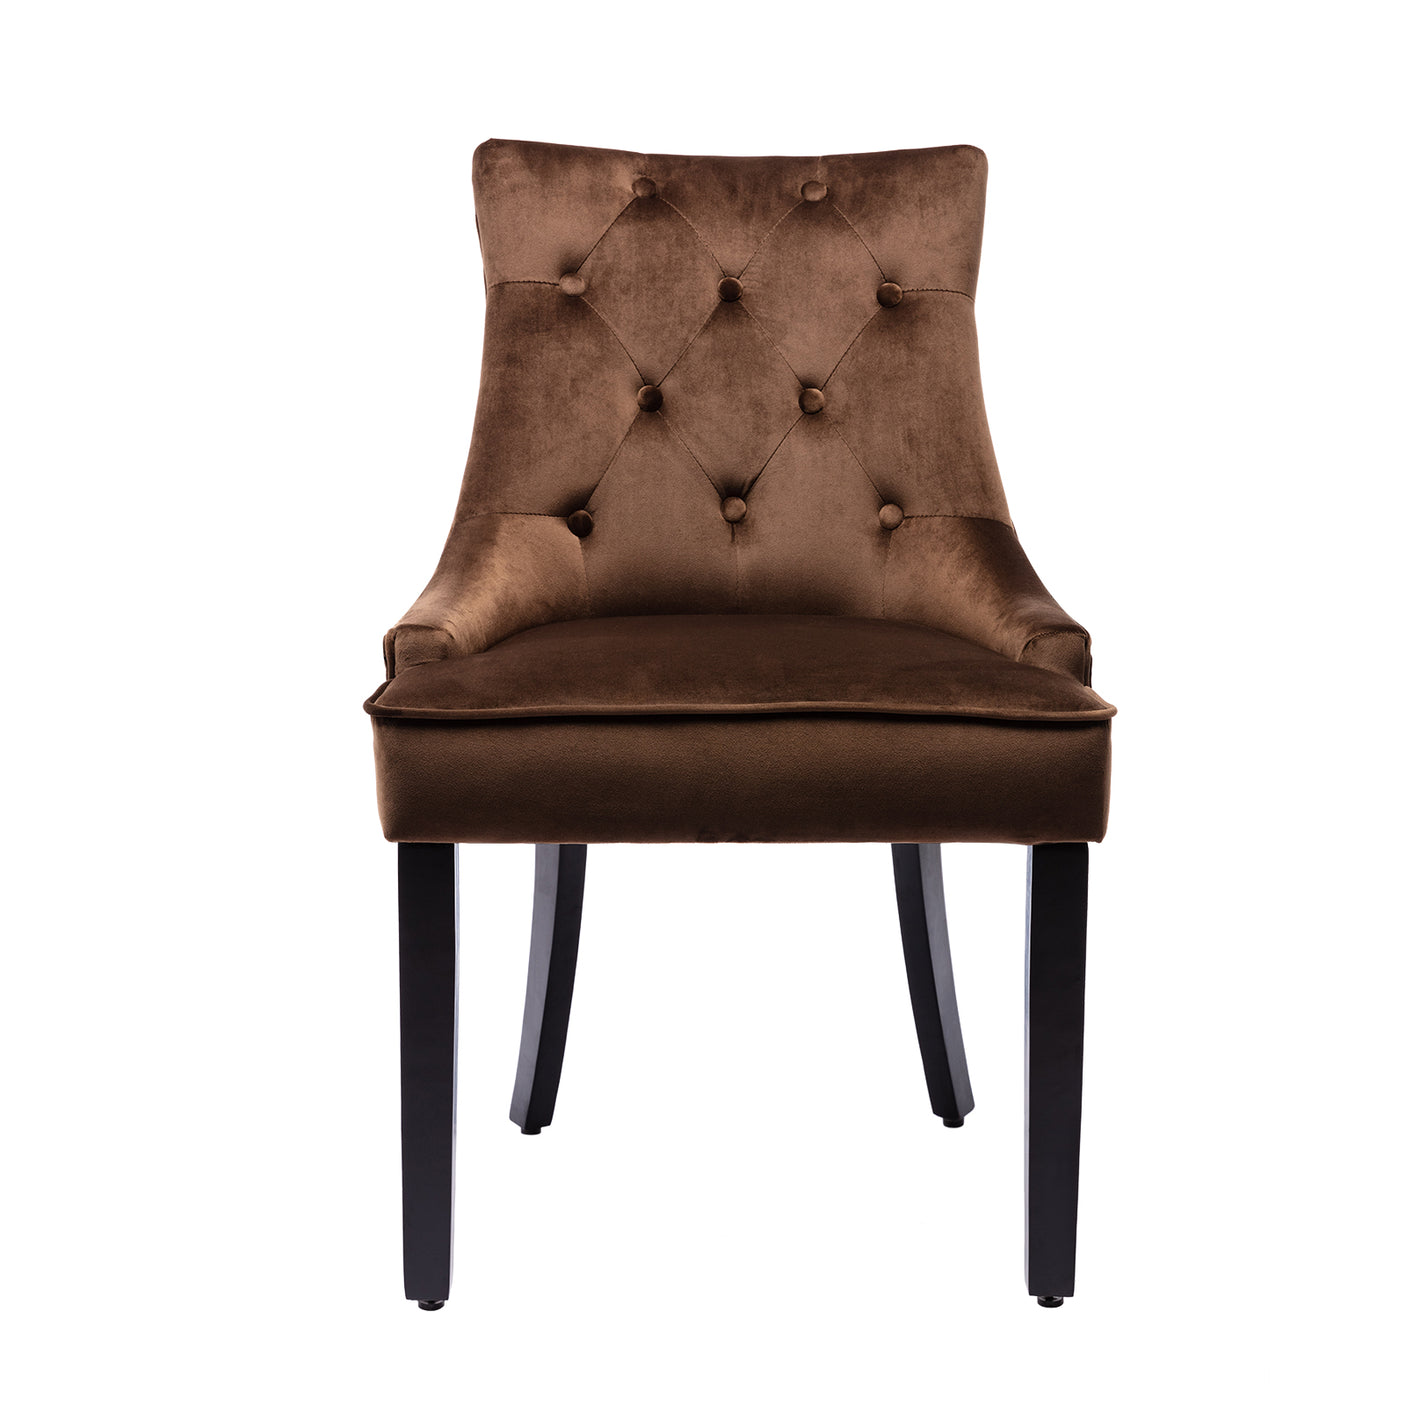 Dining Chairs with Arms x 2 - Brown